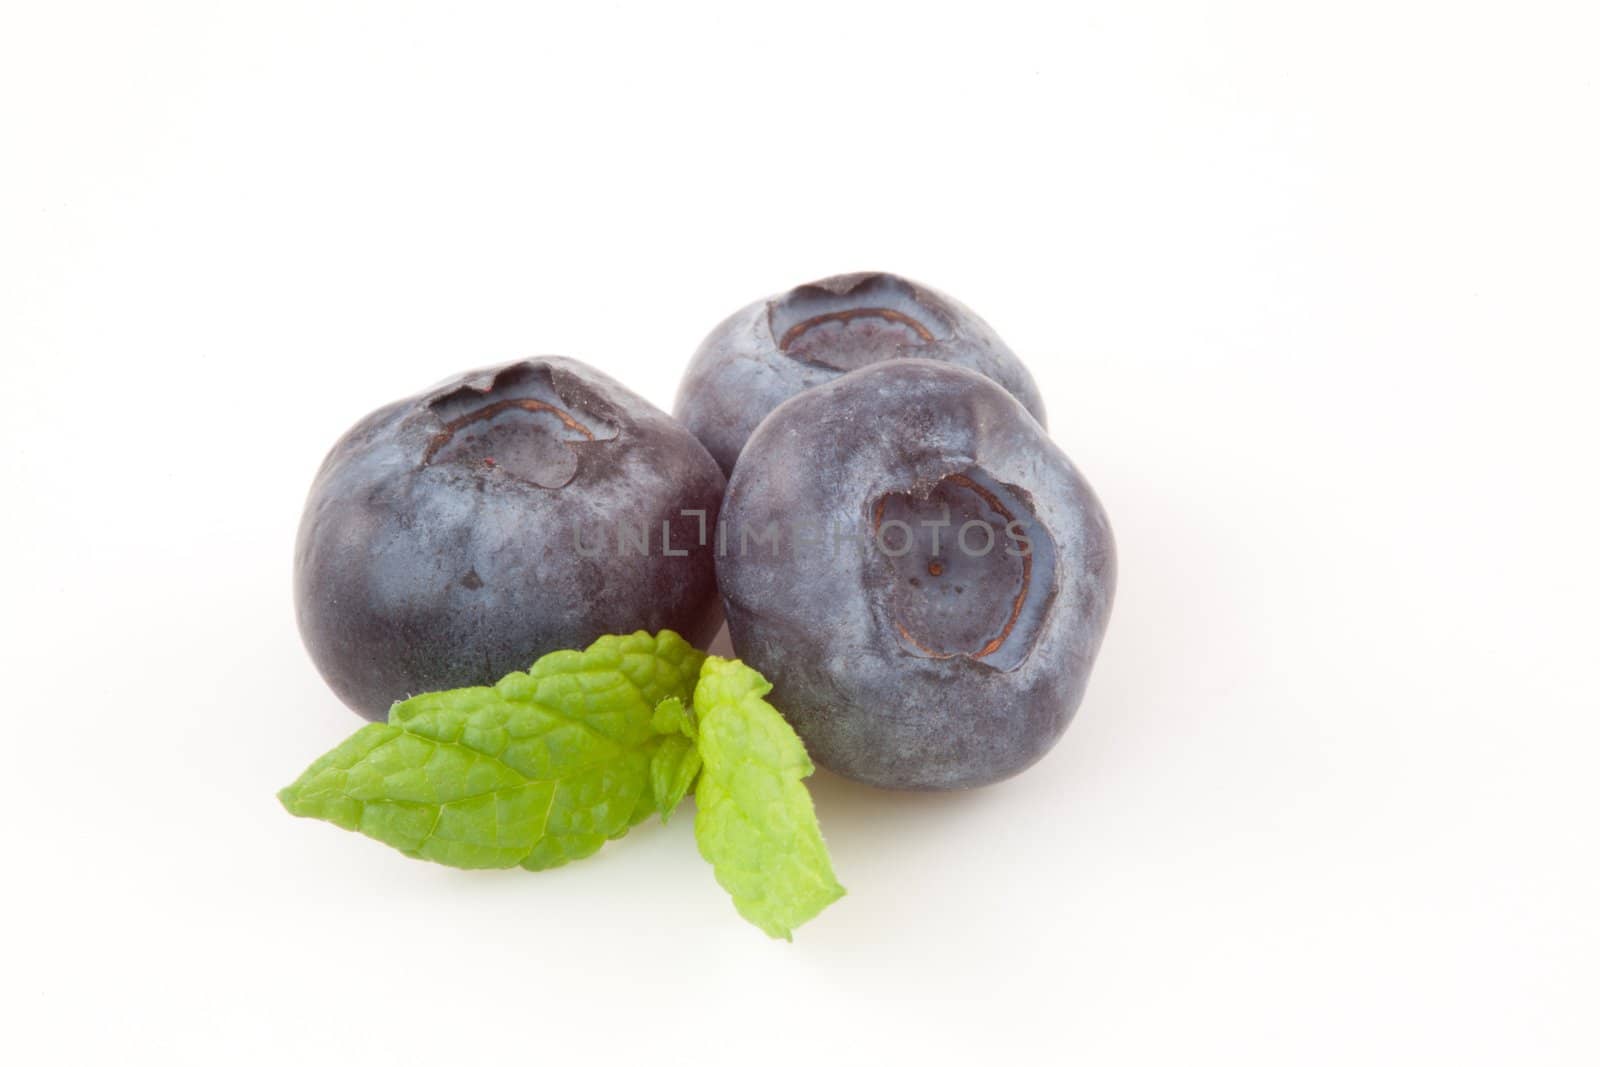 Three blueberries against a white background